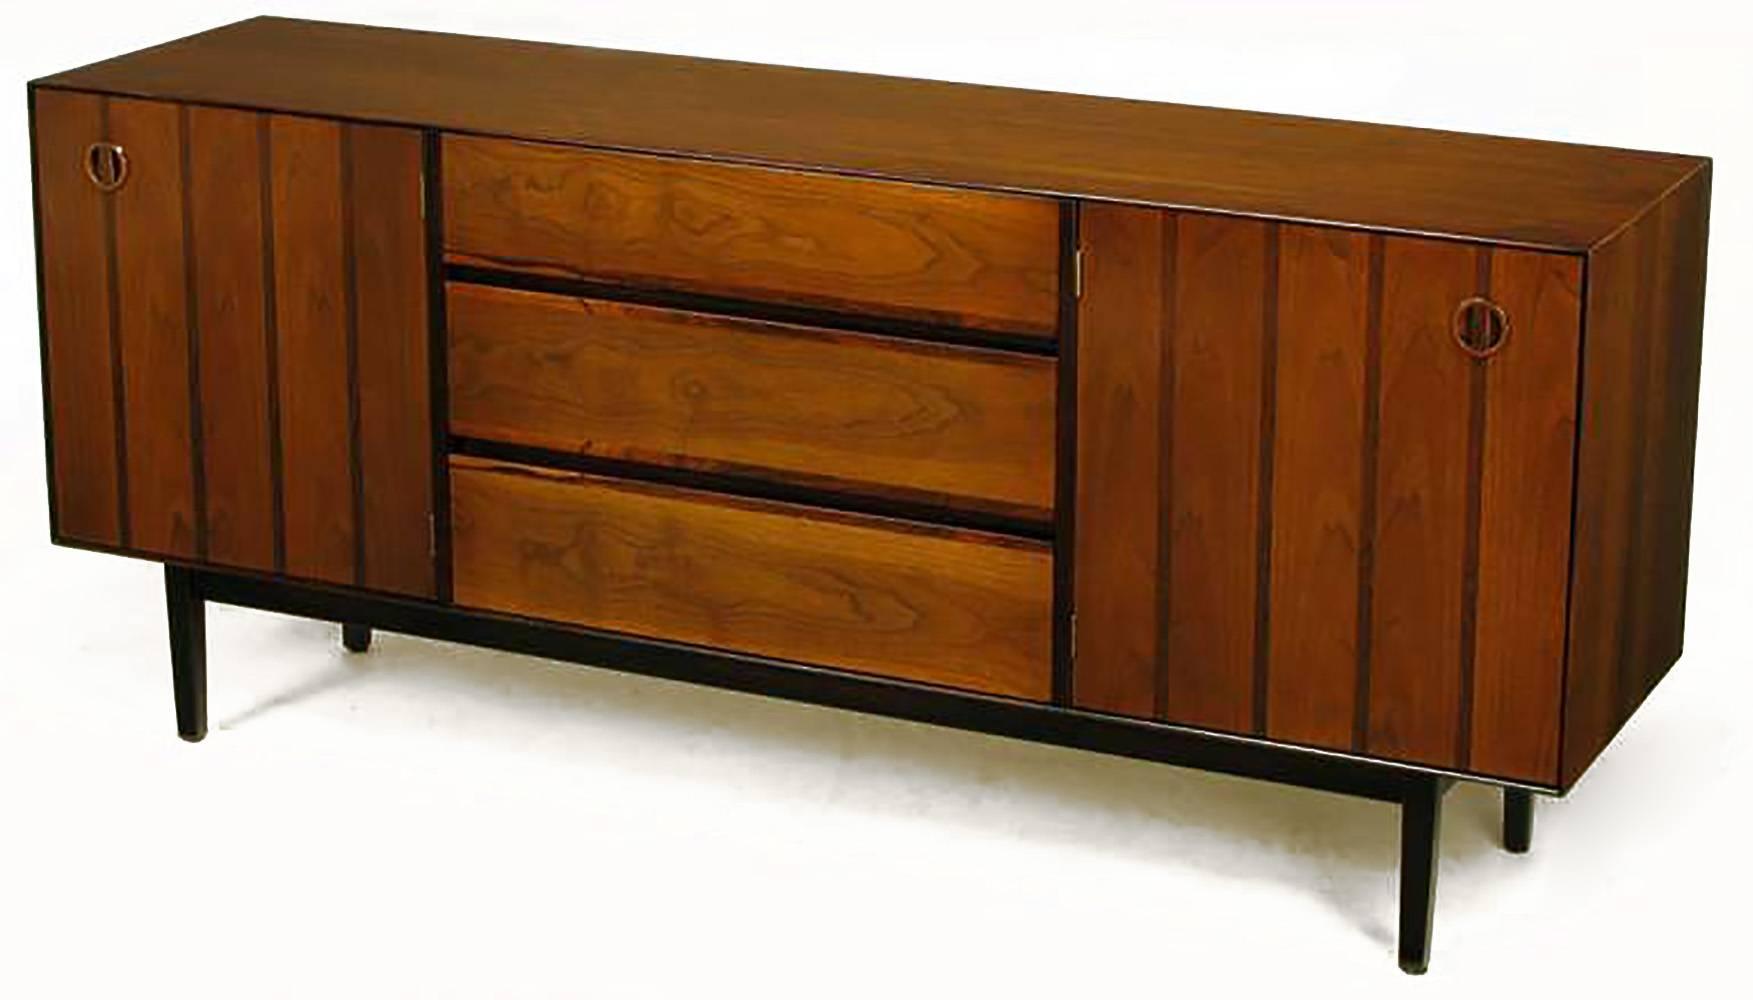 American made parquetry front long dresser with two hinged doors and three drawers. Doors consist of alternating walnut and rosewood strips and are hinged to the inside edge. Three large drawers are cover in walnut with rosewood edging to the top